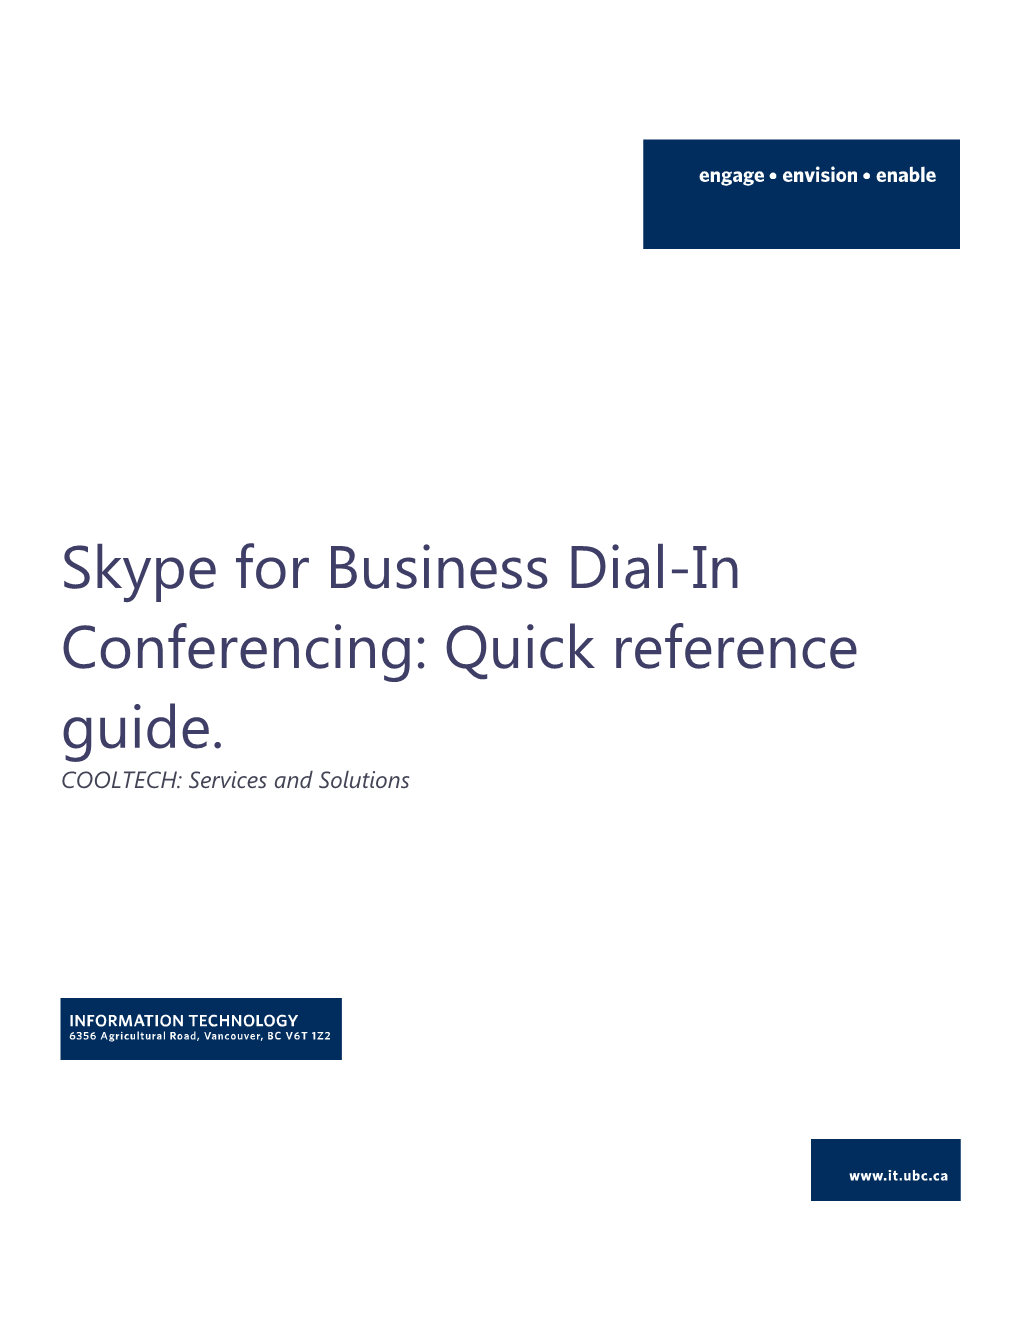 Skype for Business Dial-In Conferencing: Quick Reference Guide